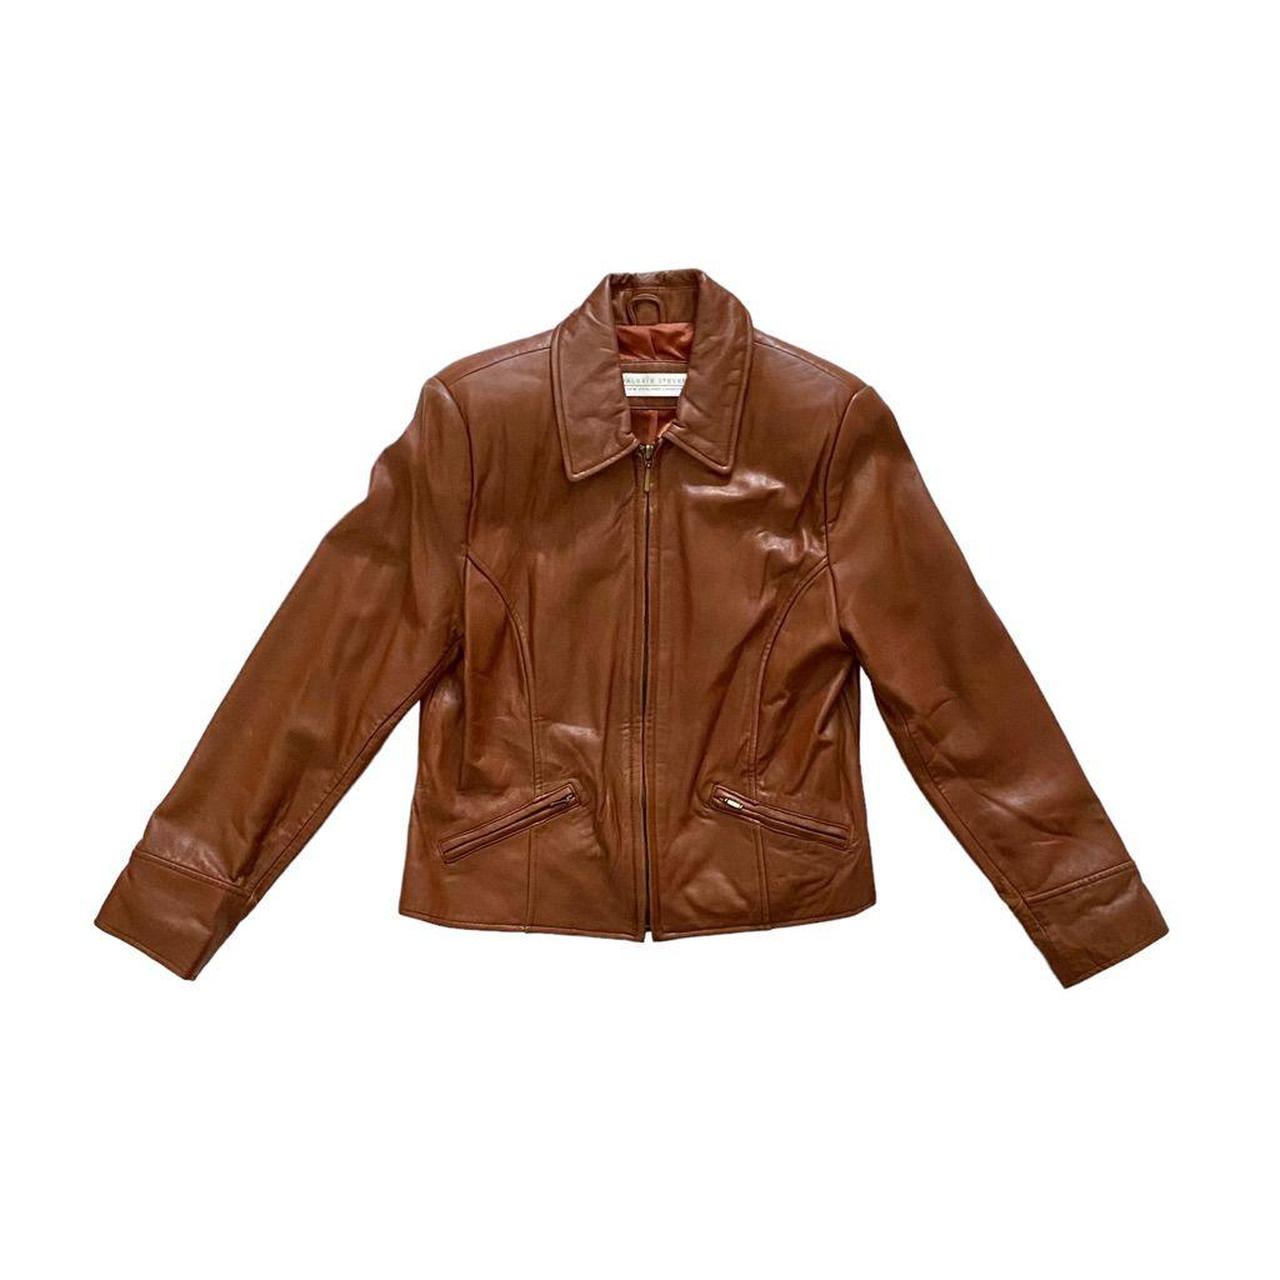 Product Image 1 - vintage soft leather jacket

FEATURES:
beauuutiful true